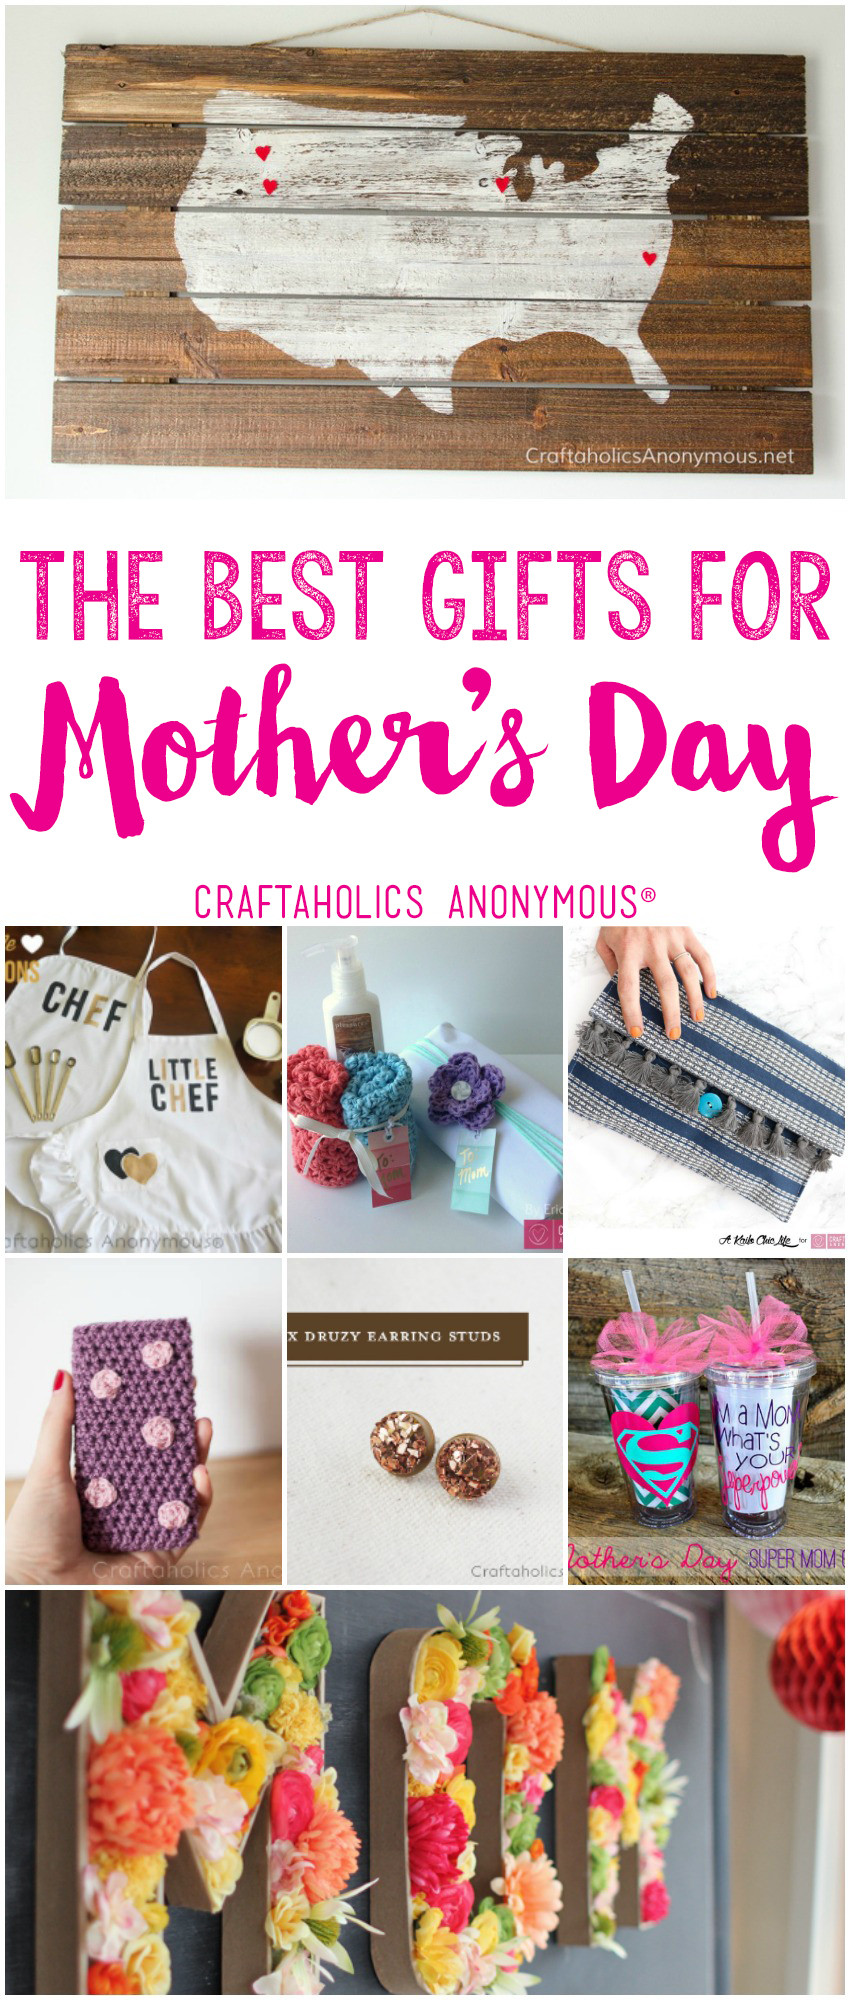 Great Gift Ideas For Mothers
 Craftaholics Anonymous